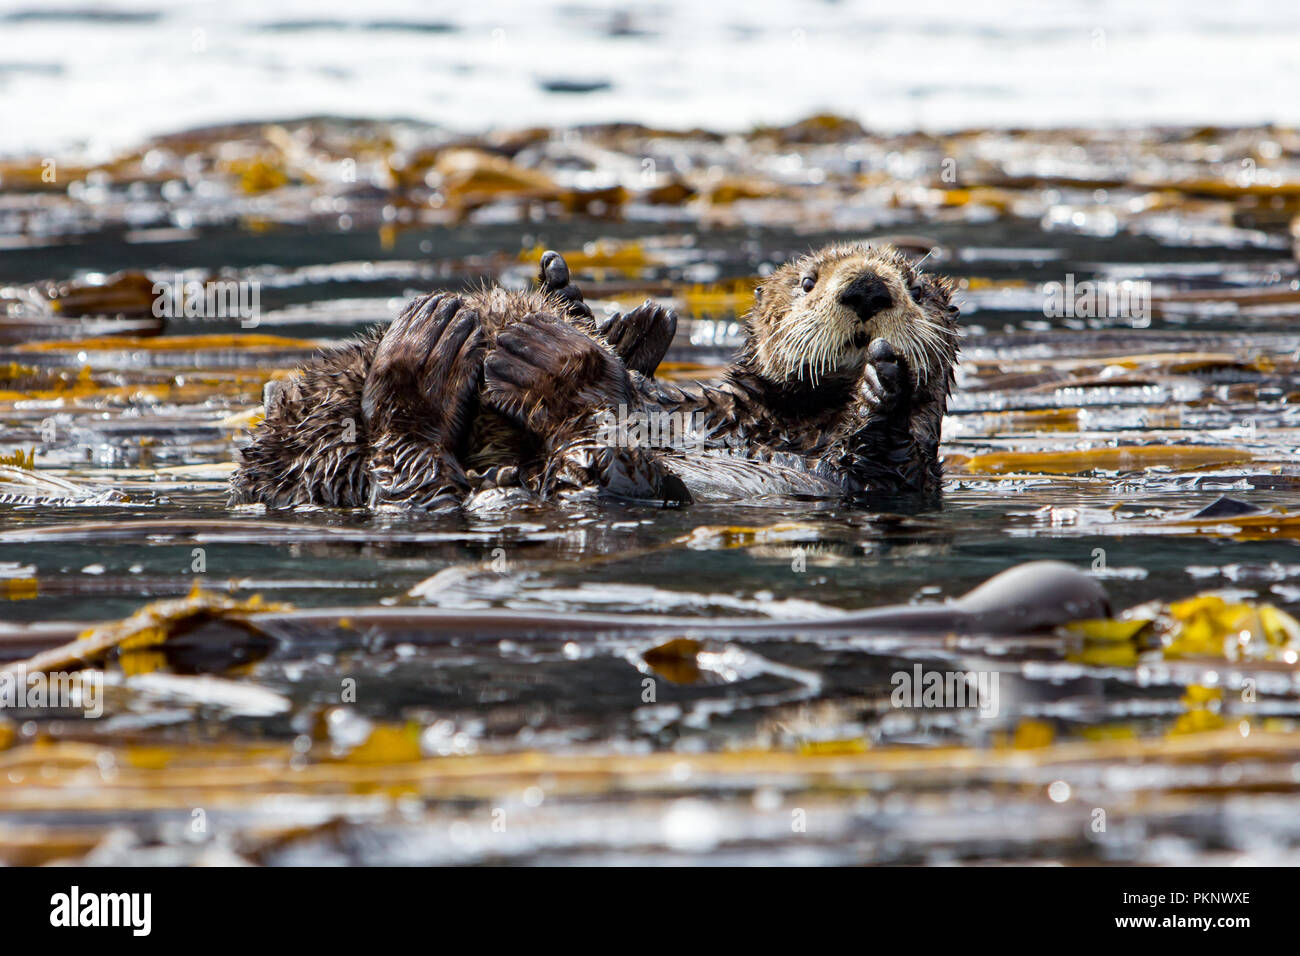 Sea otter, Enhydra lutris, a marine mammal and wildlife highlight in the kelp forest of Southeast Alaska, United States of America Stock Photo